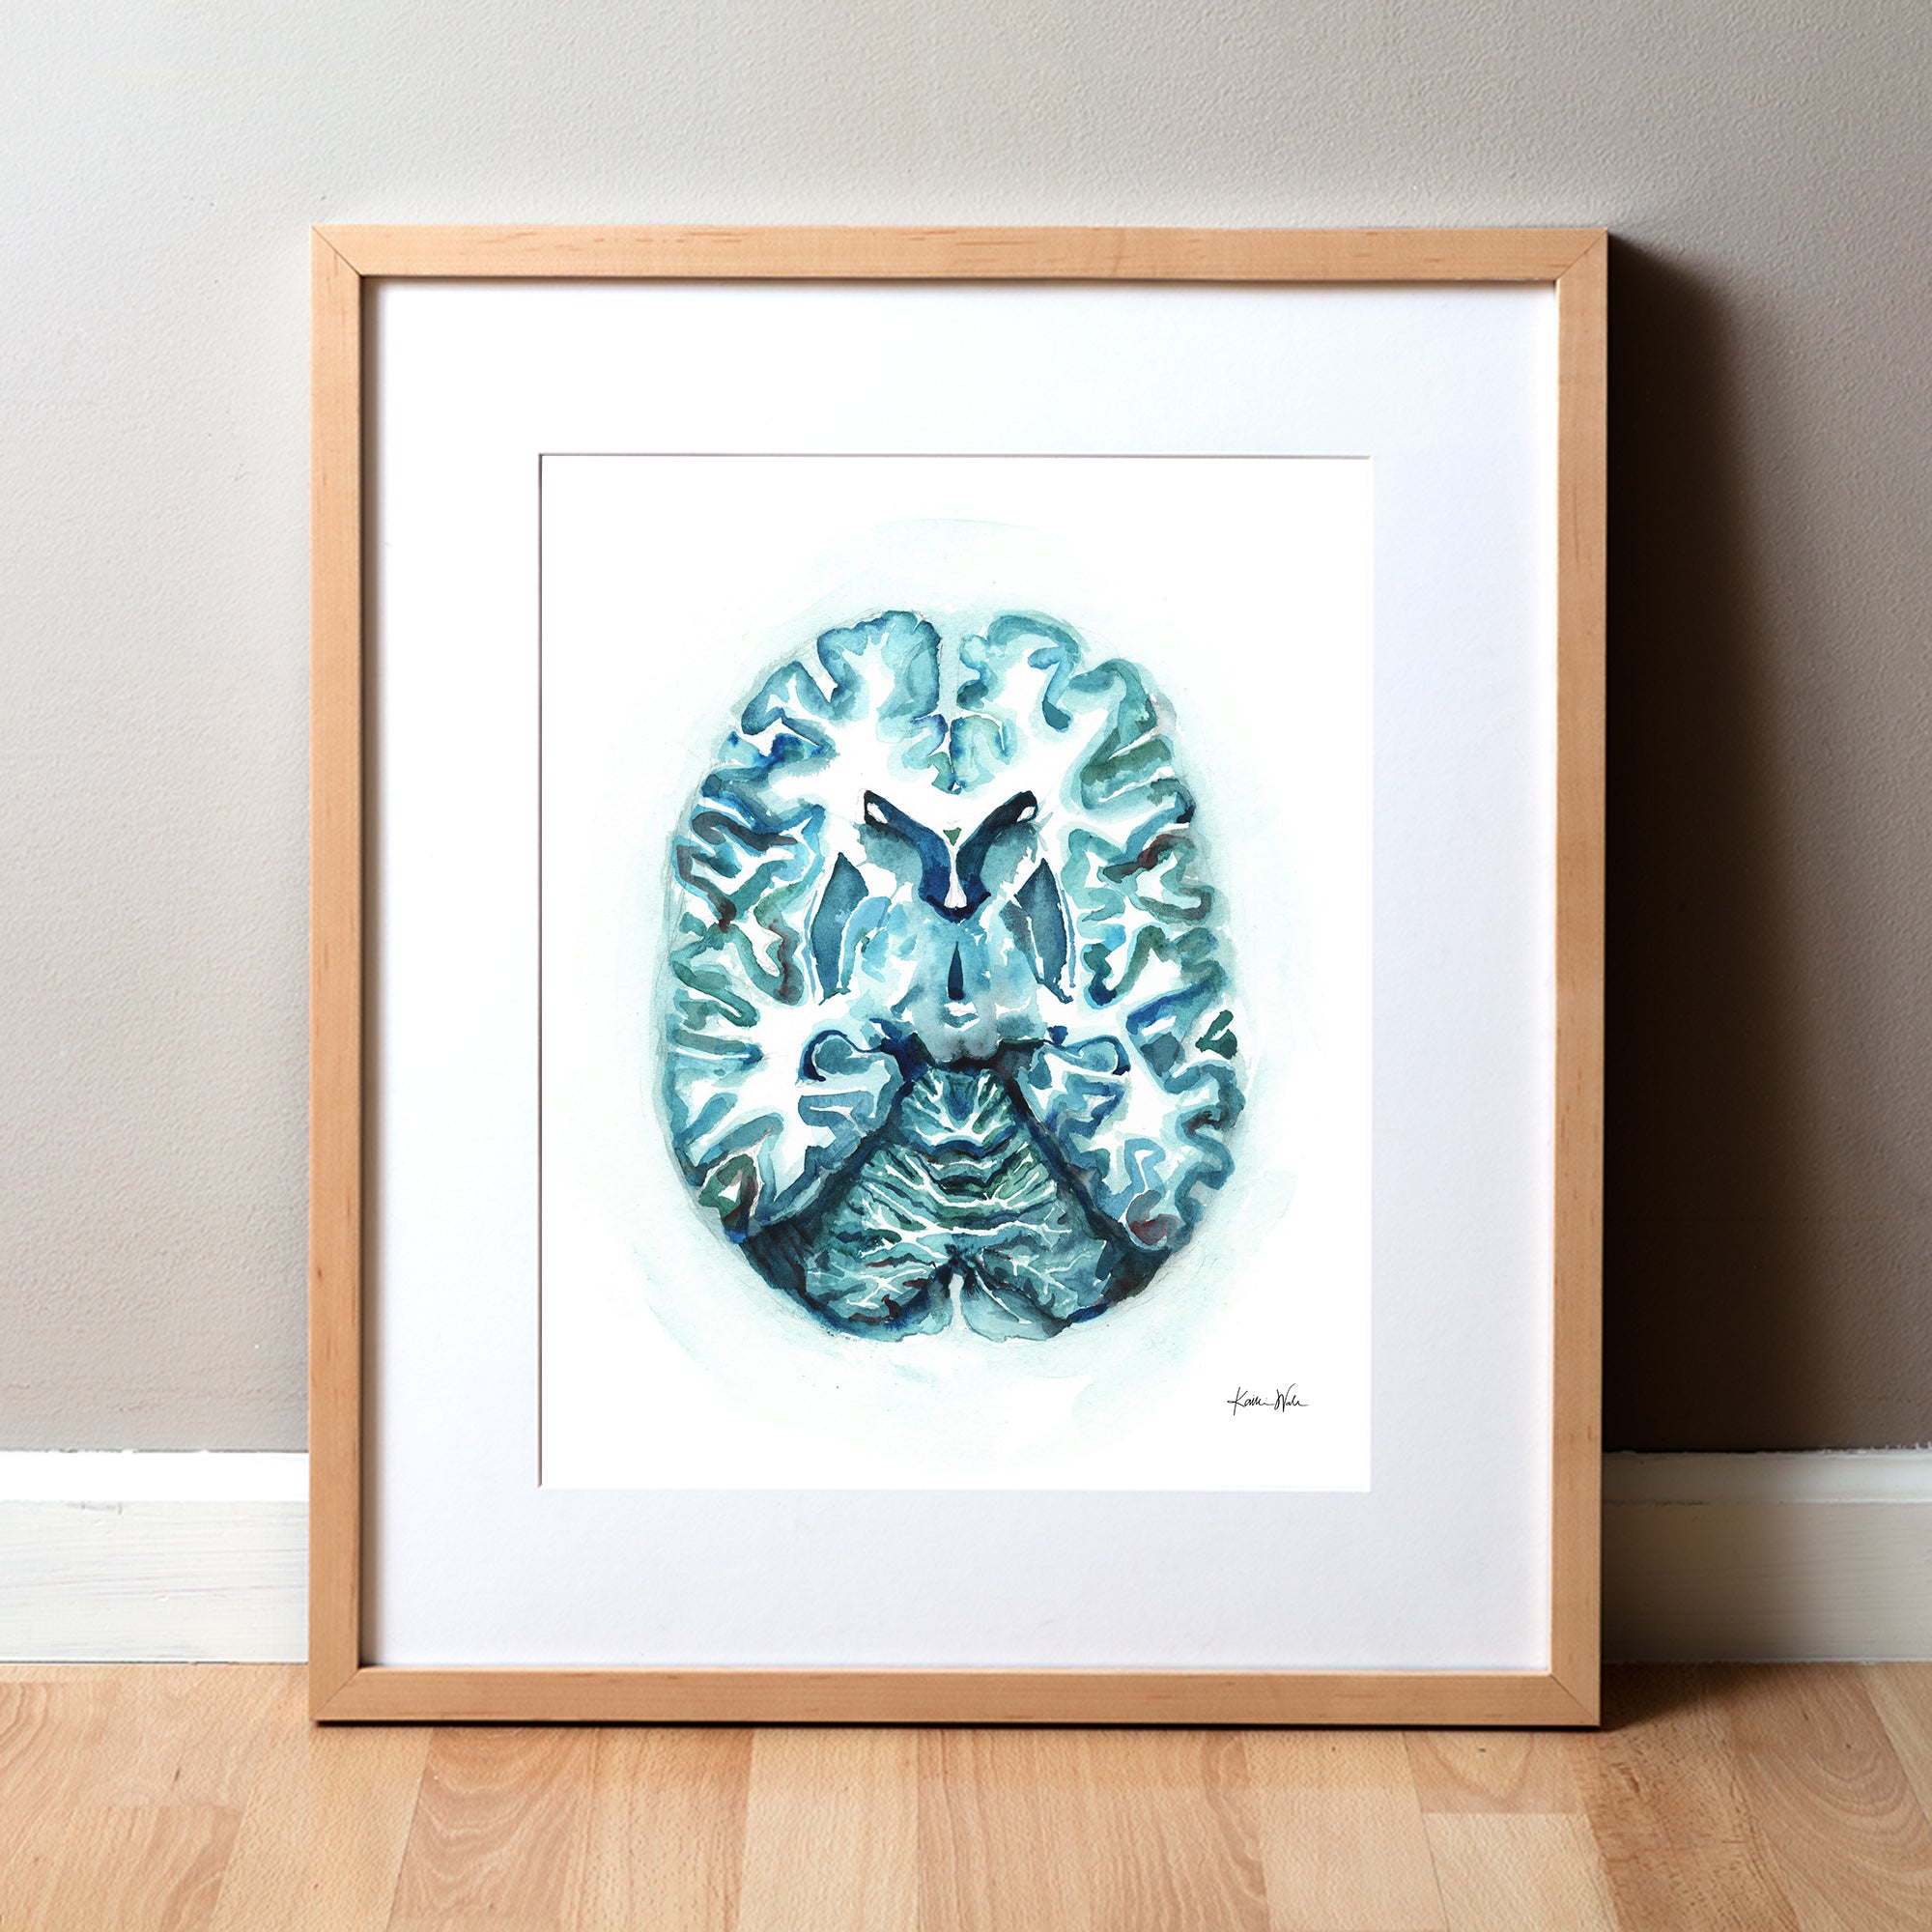 Framed watercolor painting showing a teal and blue transverse cut of the brain.